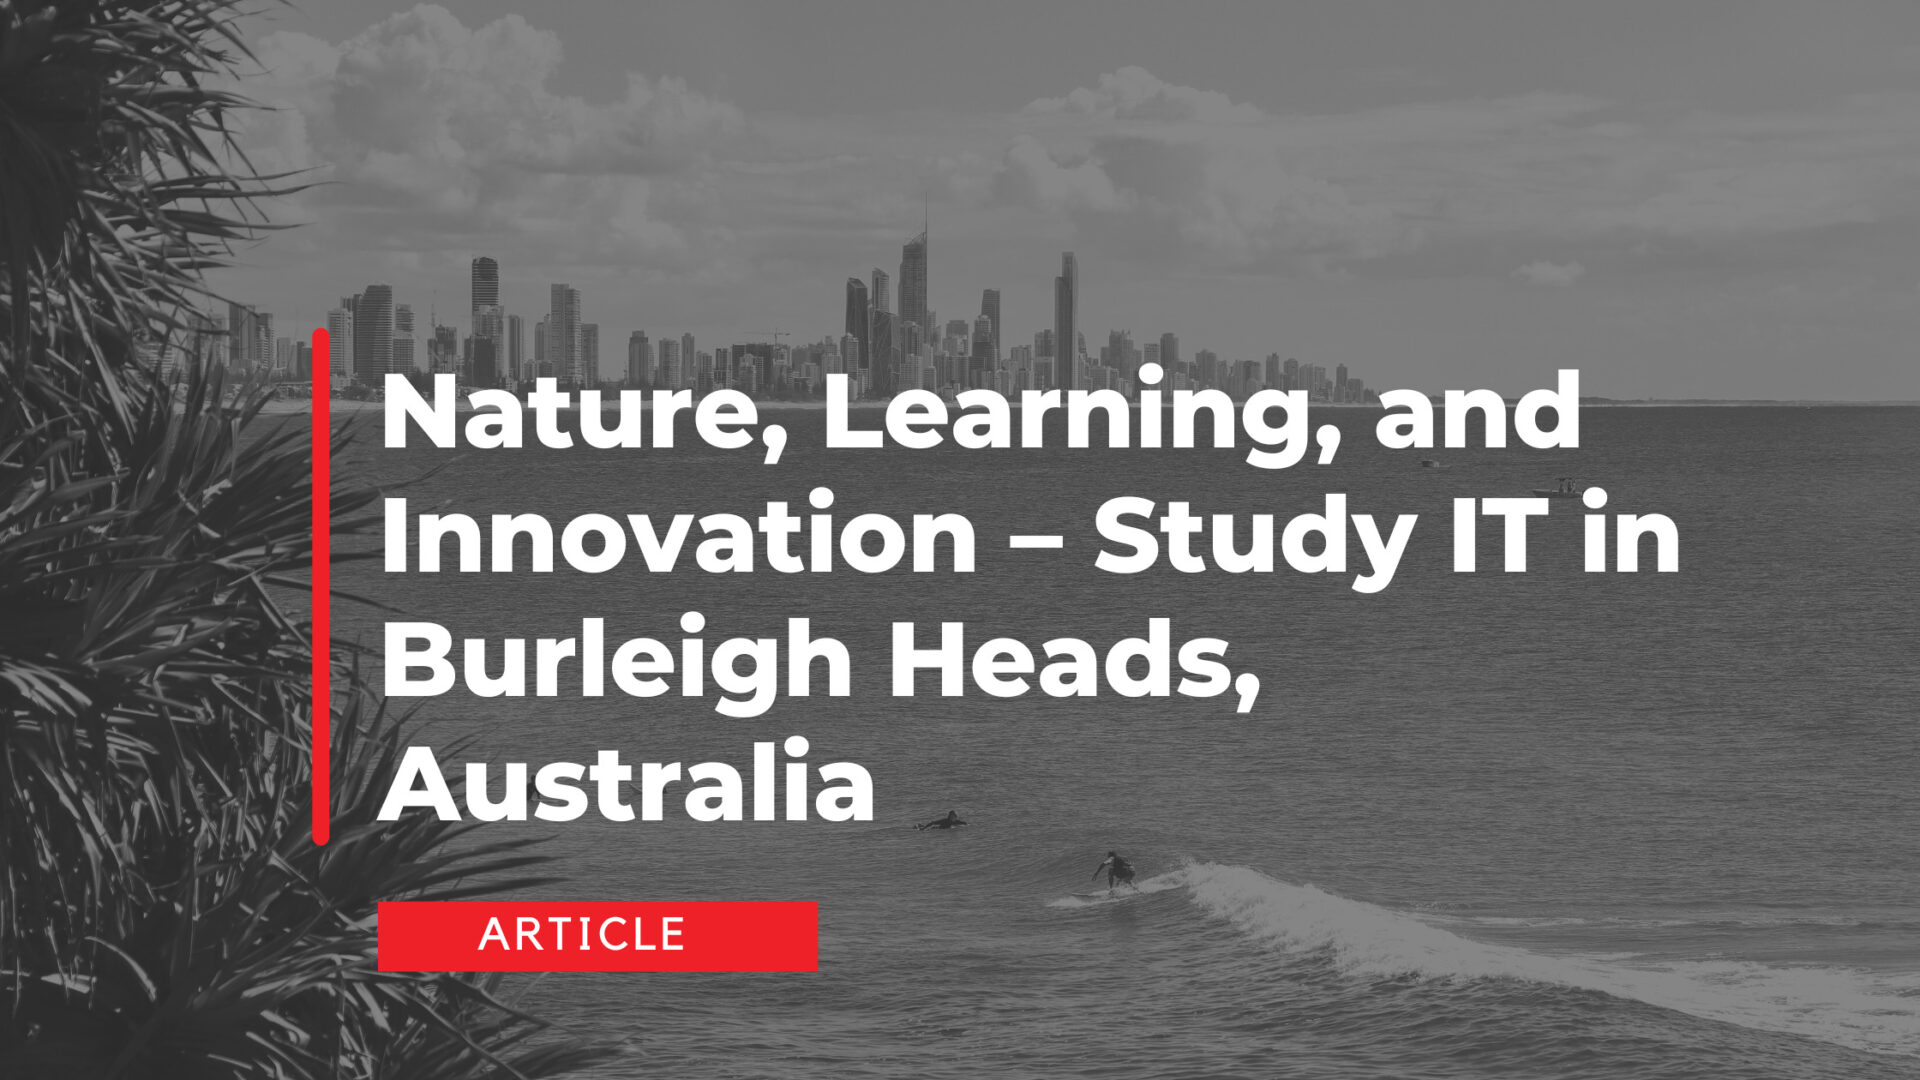 Nature, Learning, and Innovation – Study IT in Burleigh Heads, Australia